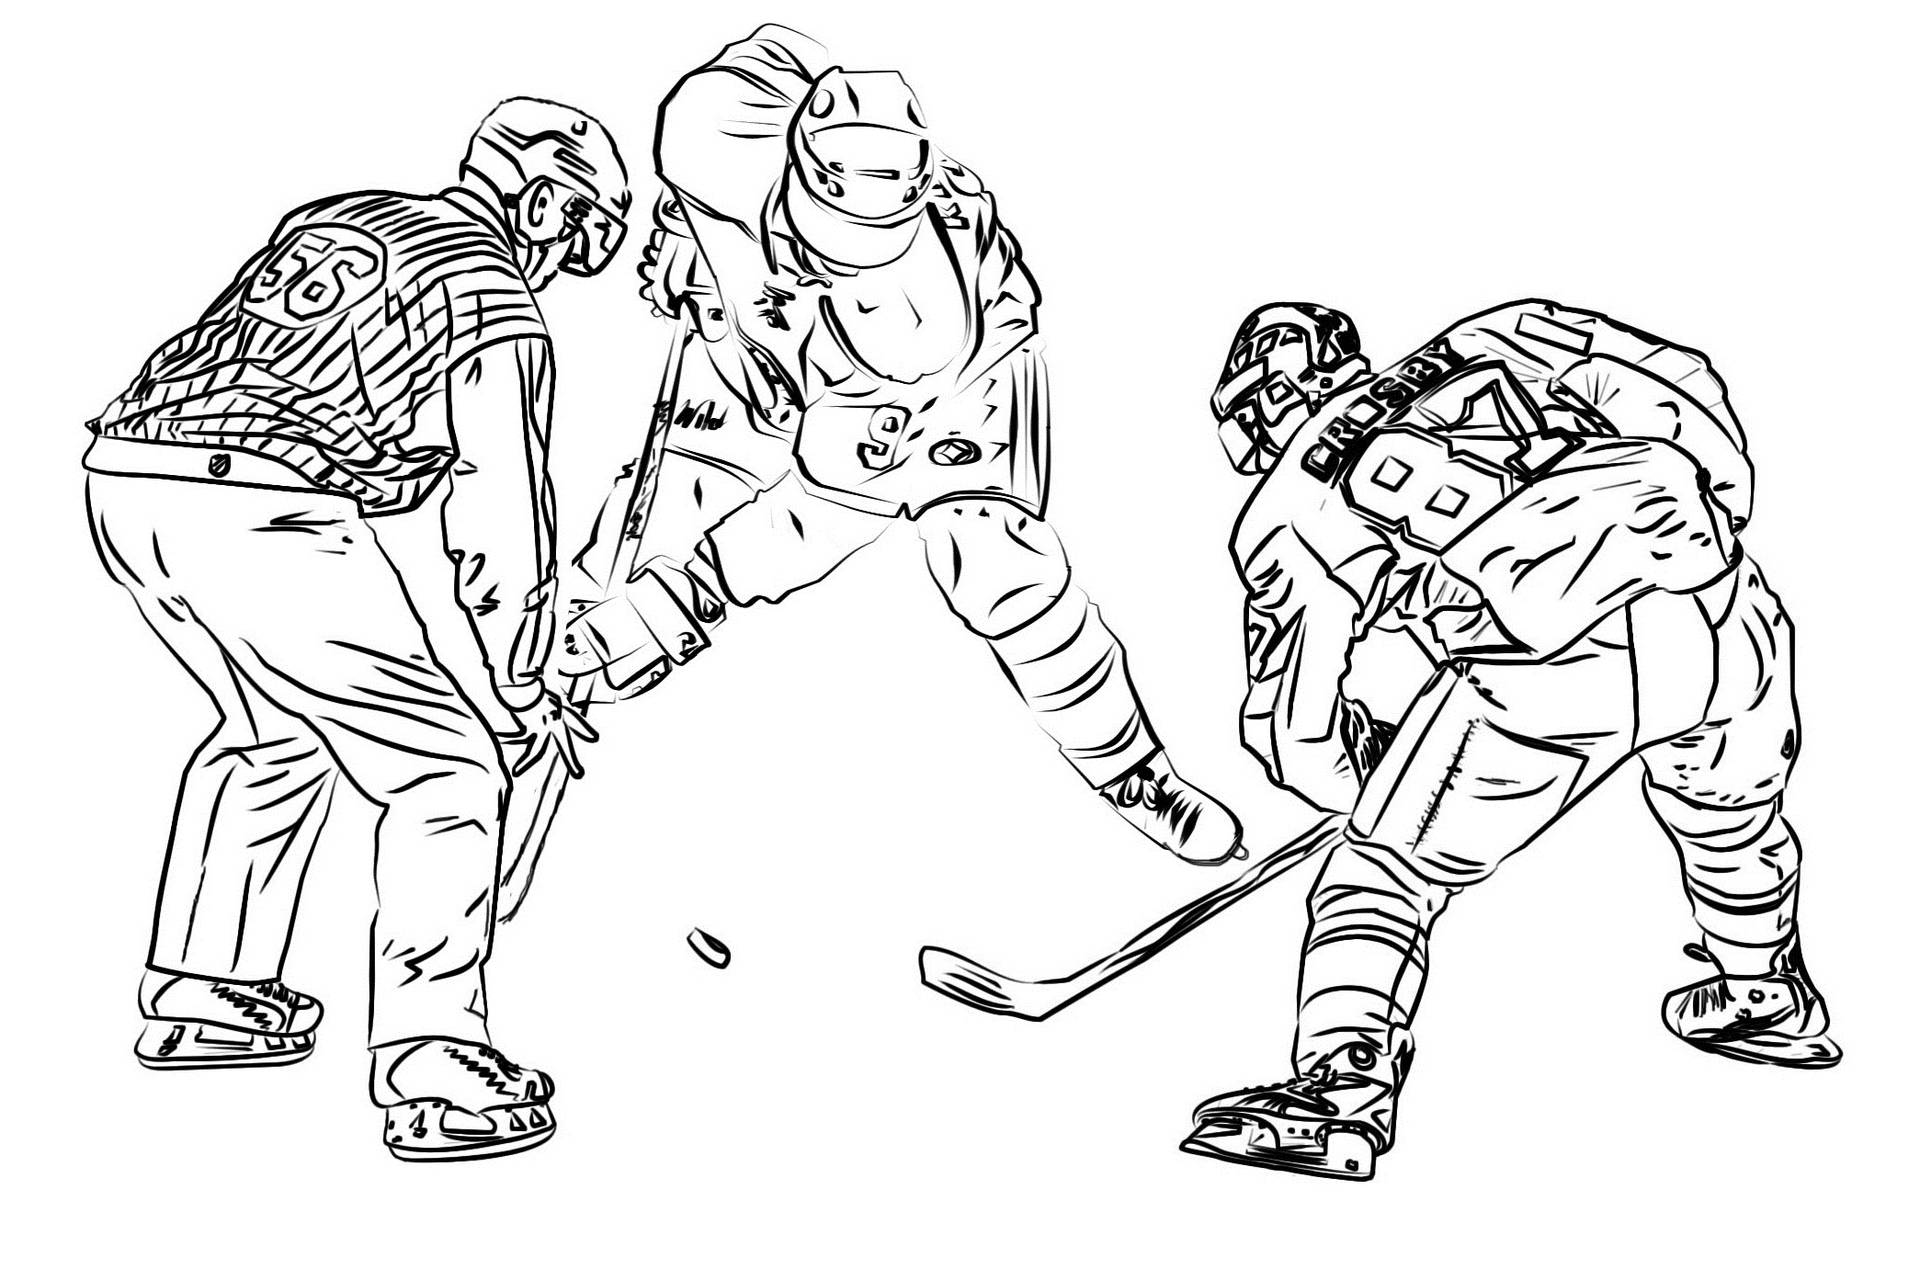 How to draw a hockey player | Step by step Drawing tutorials